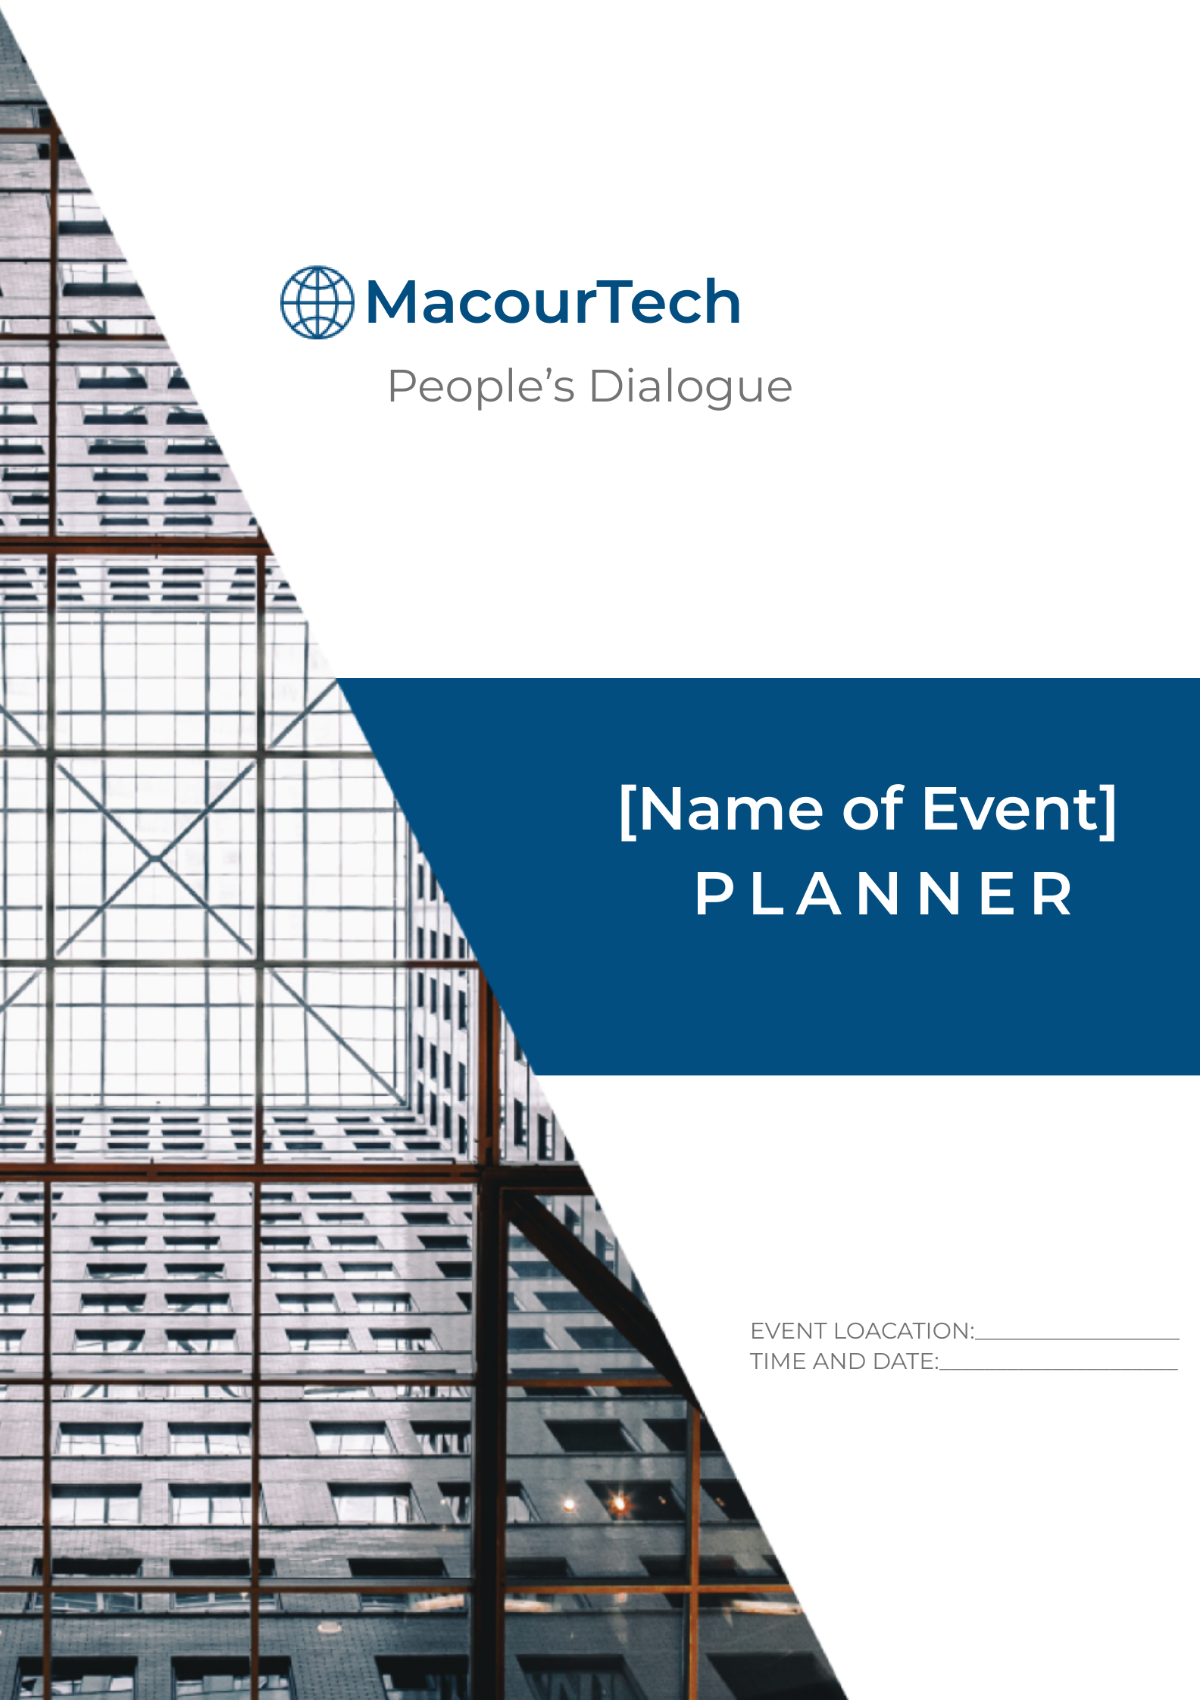 Basic Event Planner Template